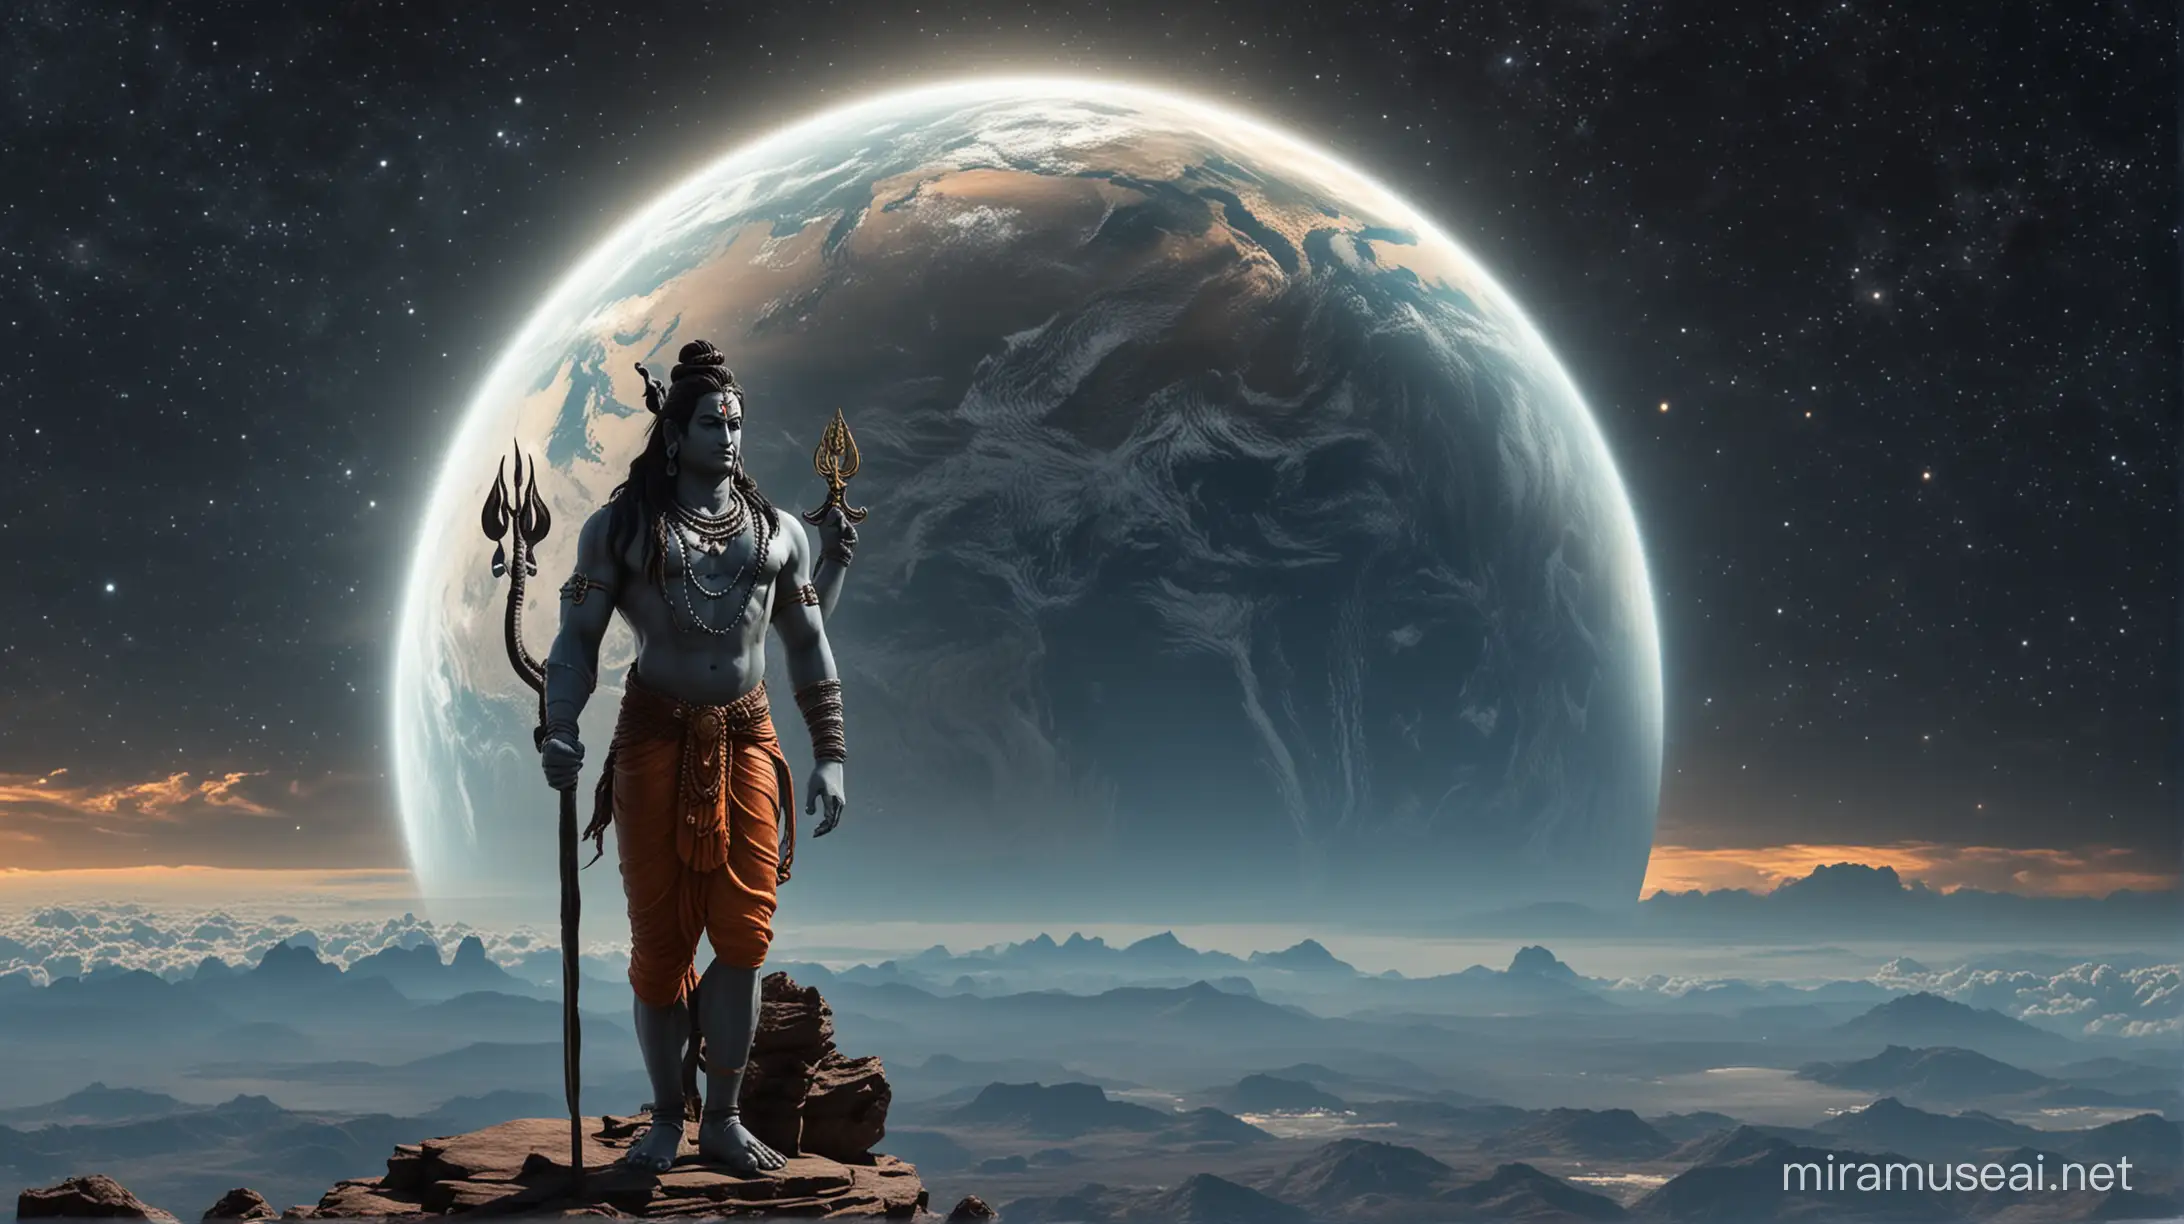 Lord Shiva Contemplating Earth Amidst Cosmic Serenity